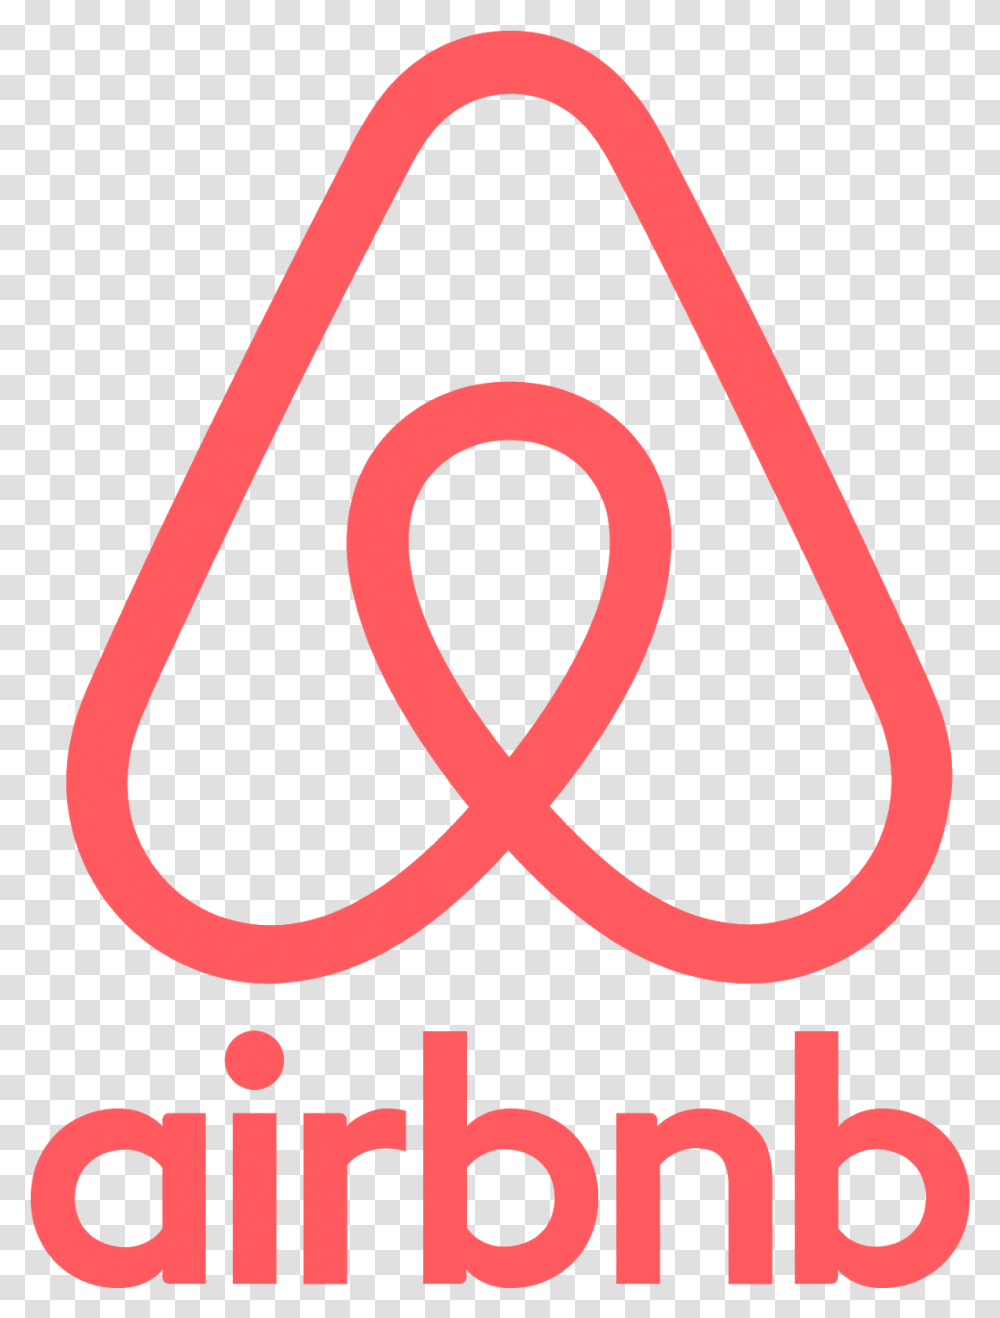 Download Logo Airbnb Icon Svg Eps Psd Ai Vector Airbnb Logo, Alphabet, Text, Symbol, Trademark Transparent Png